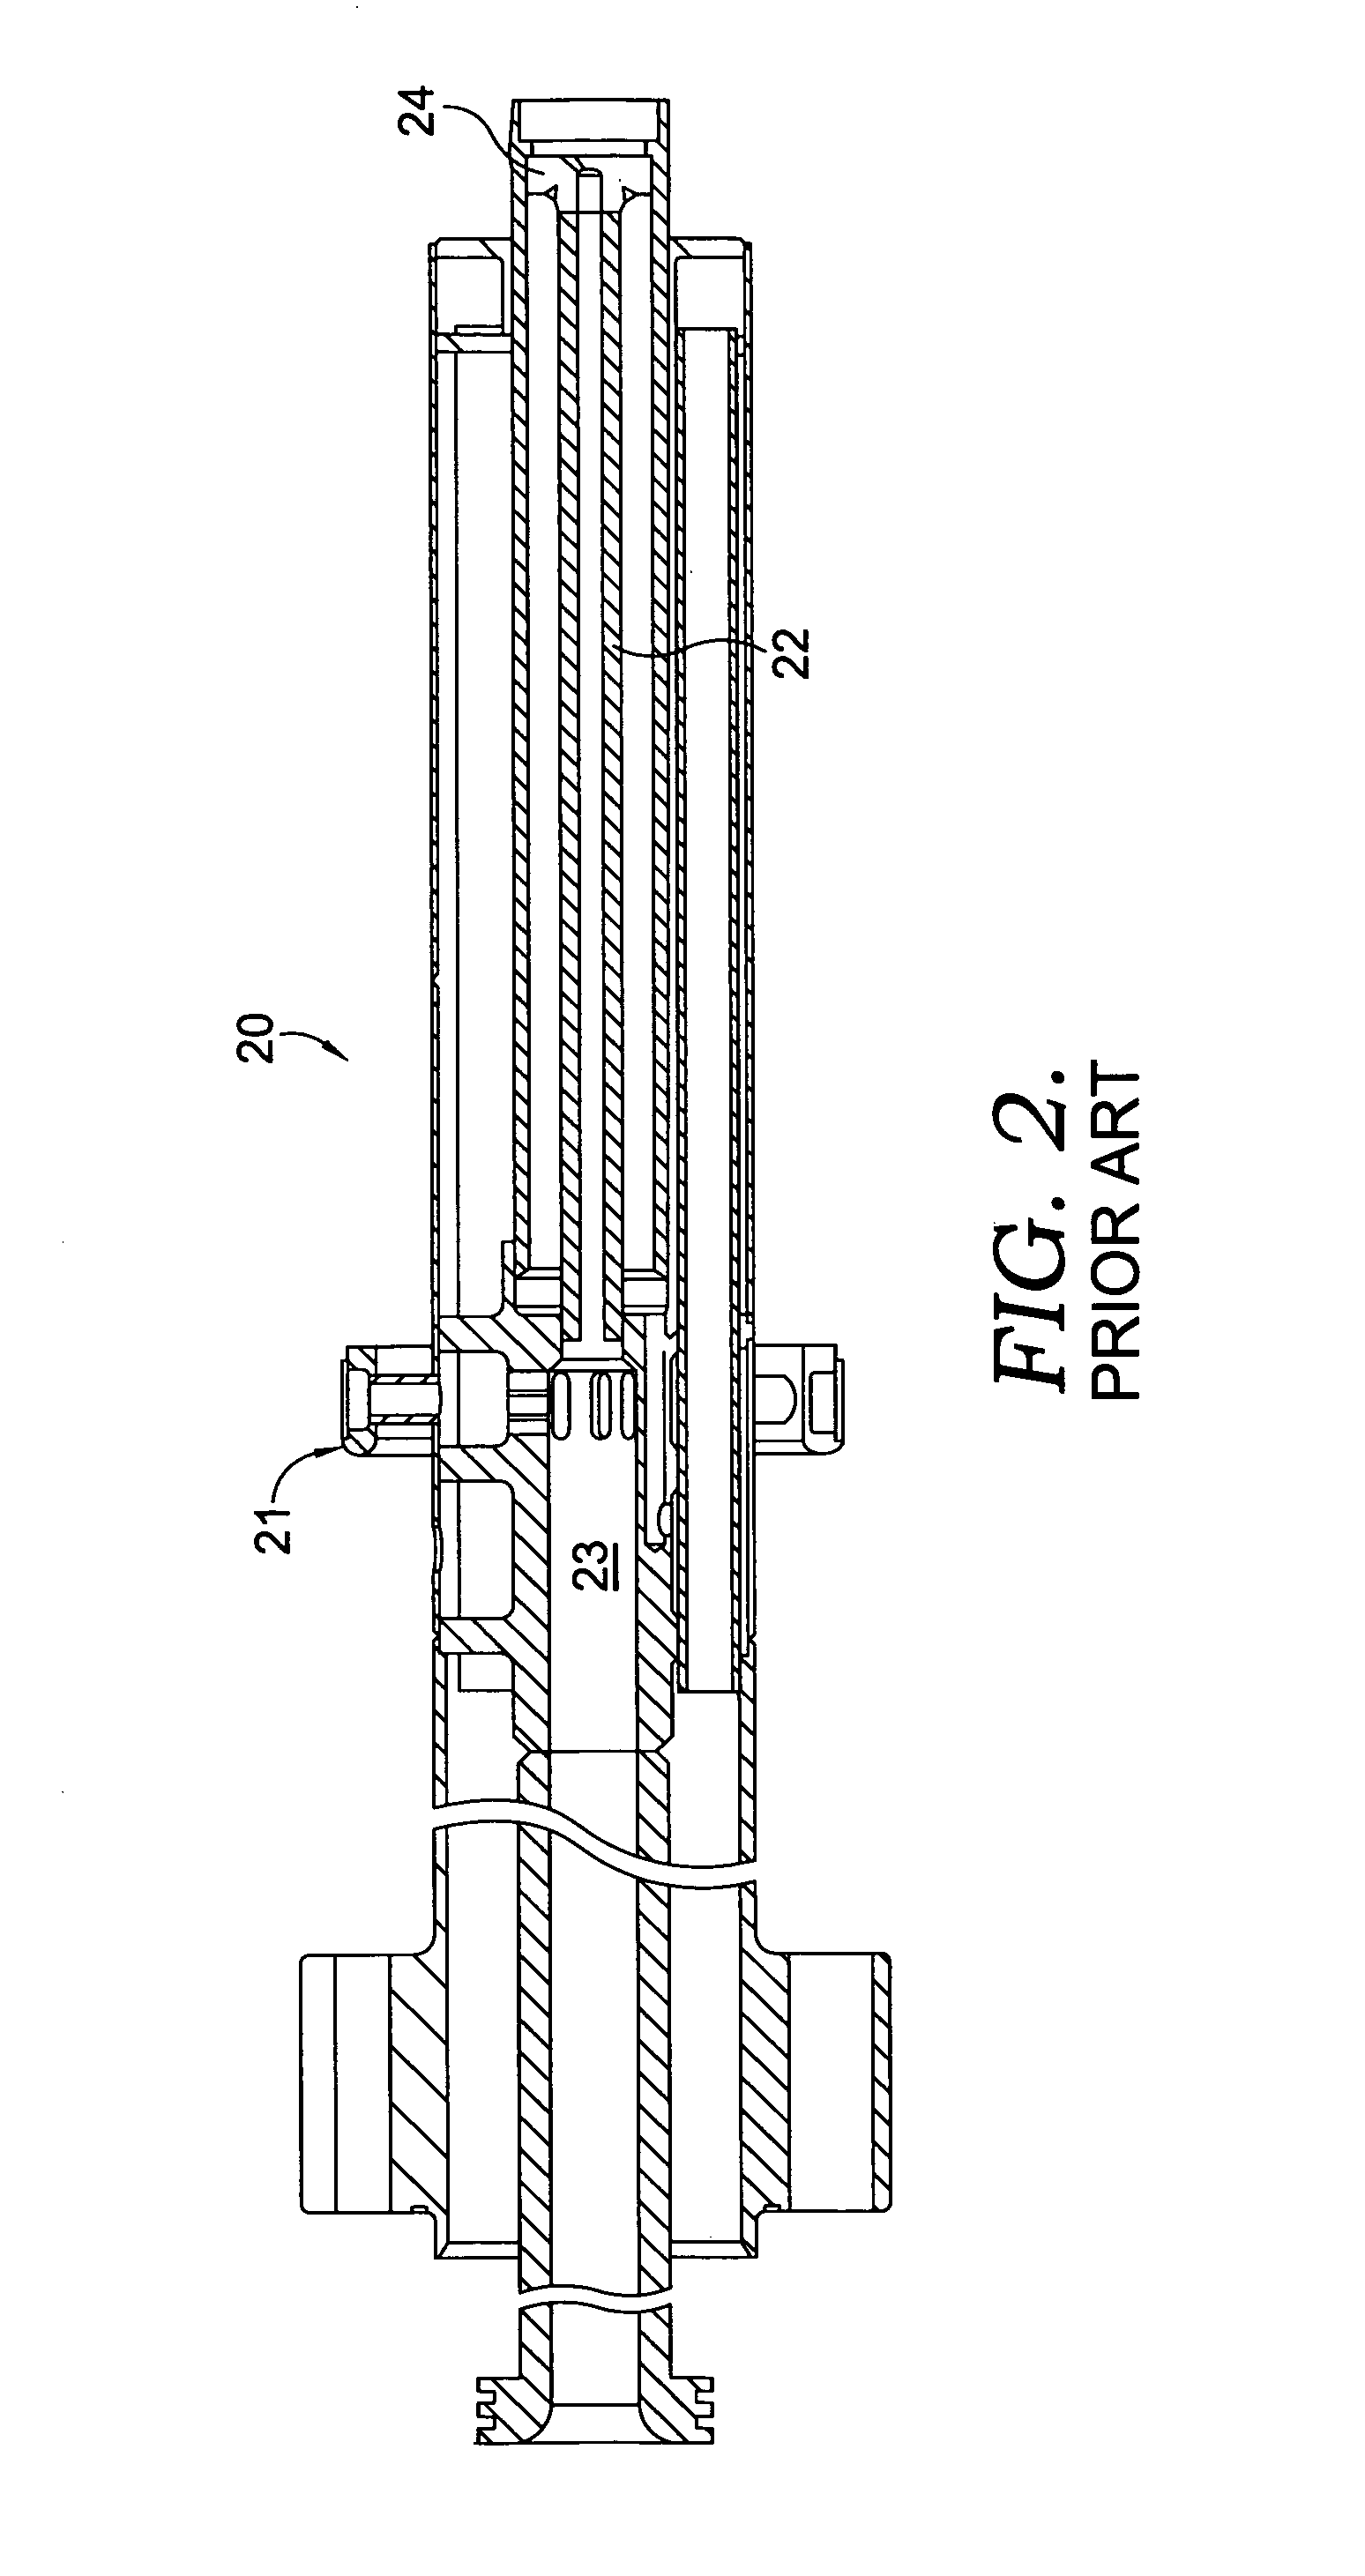 Fully premixed secondary fuel nozzle with dual fuel capability